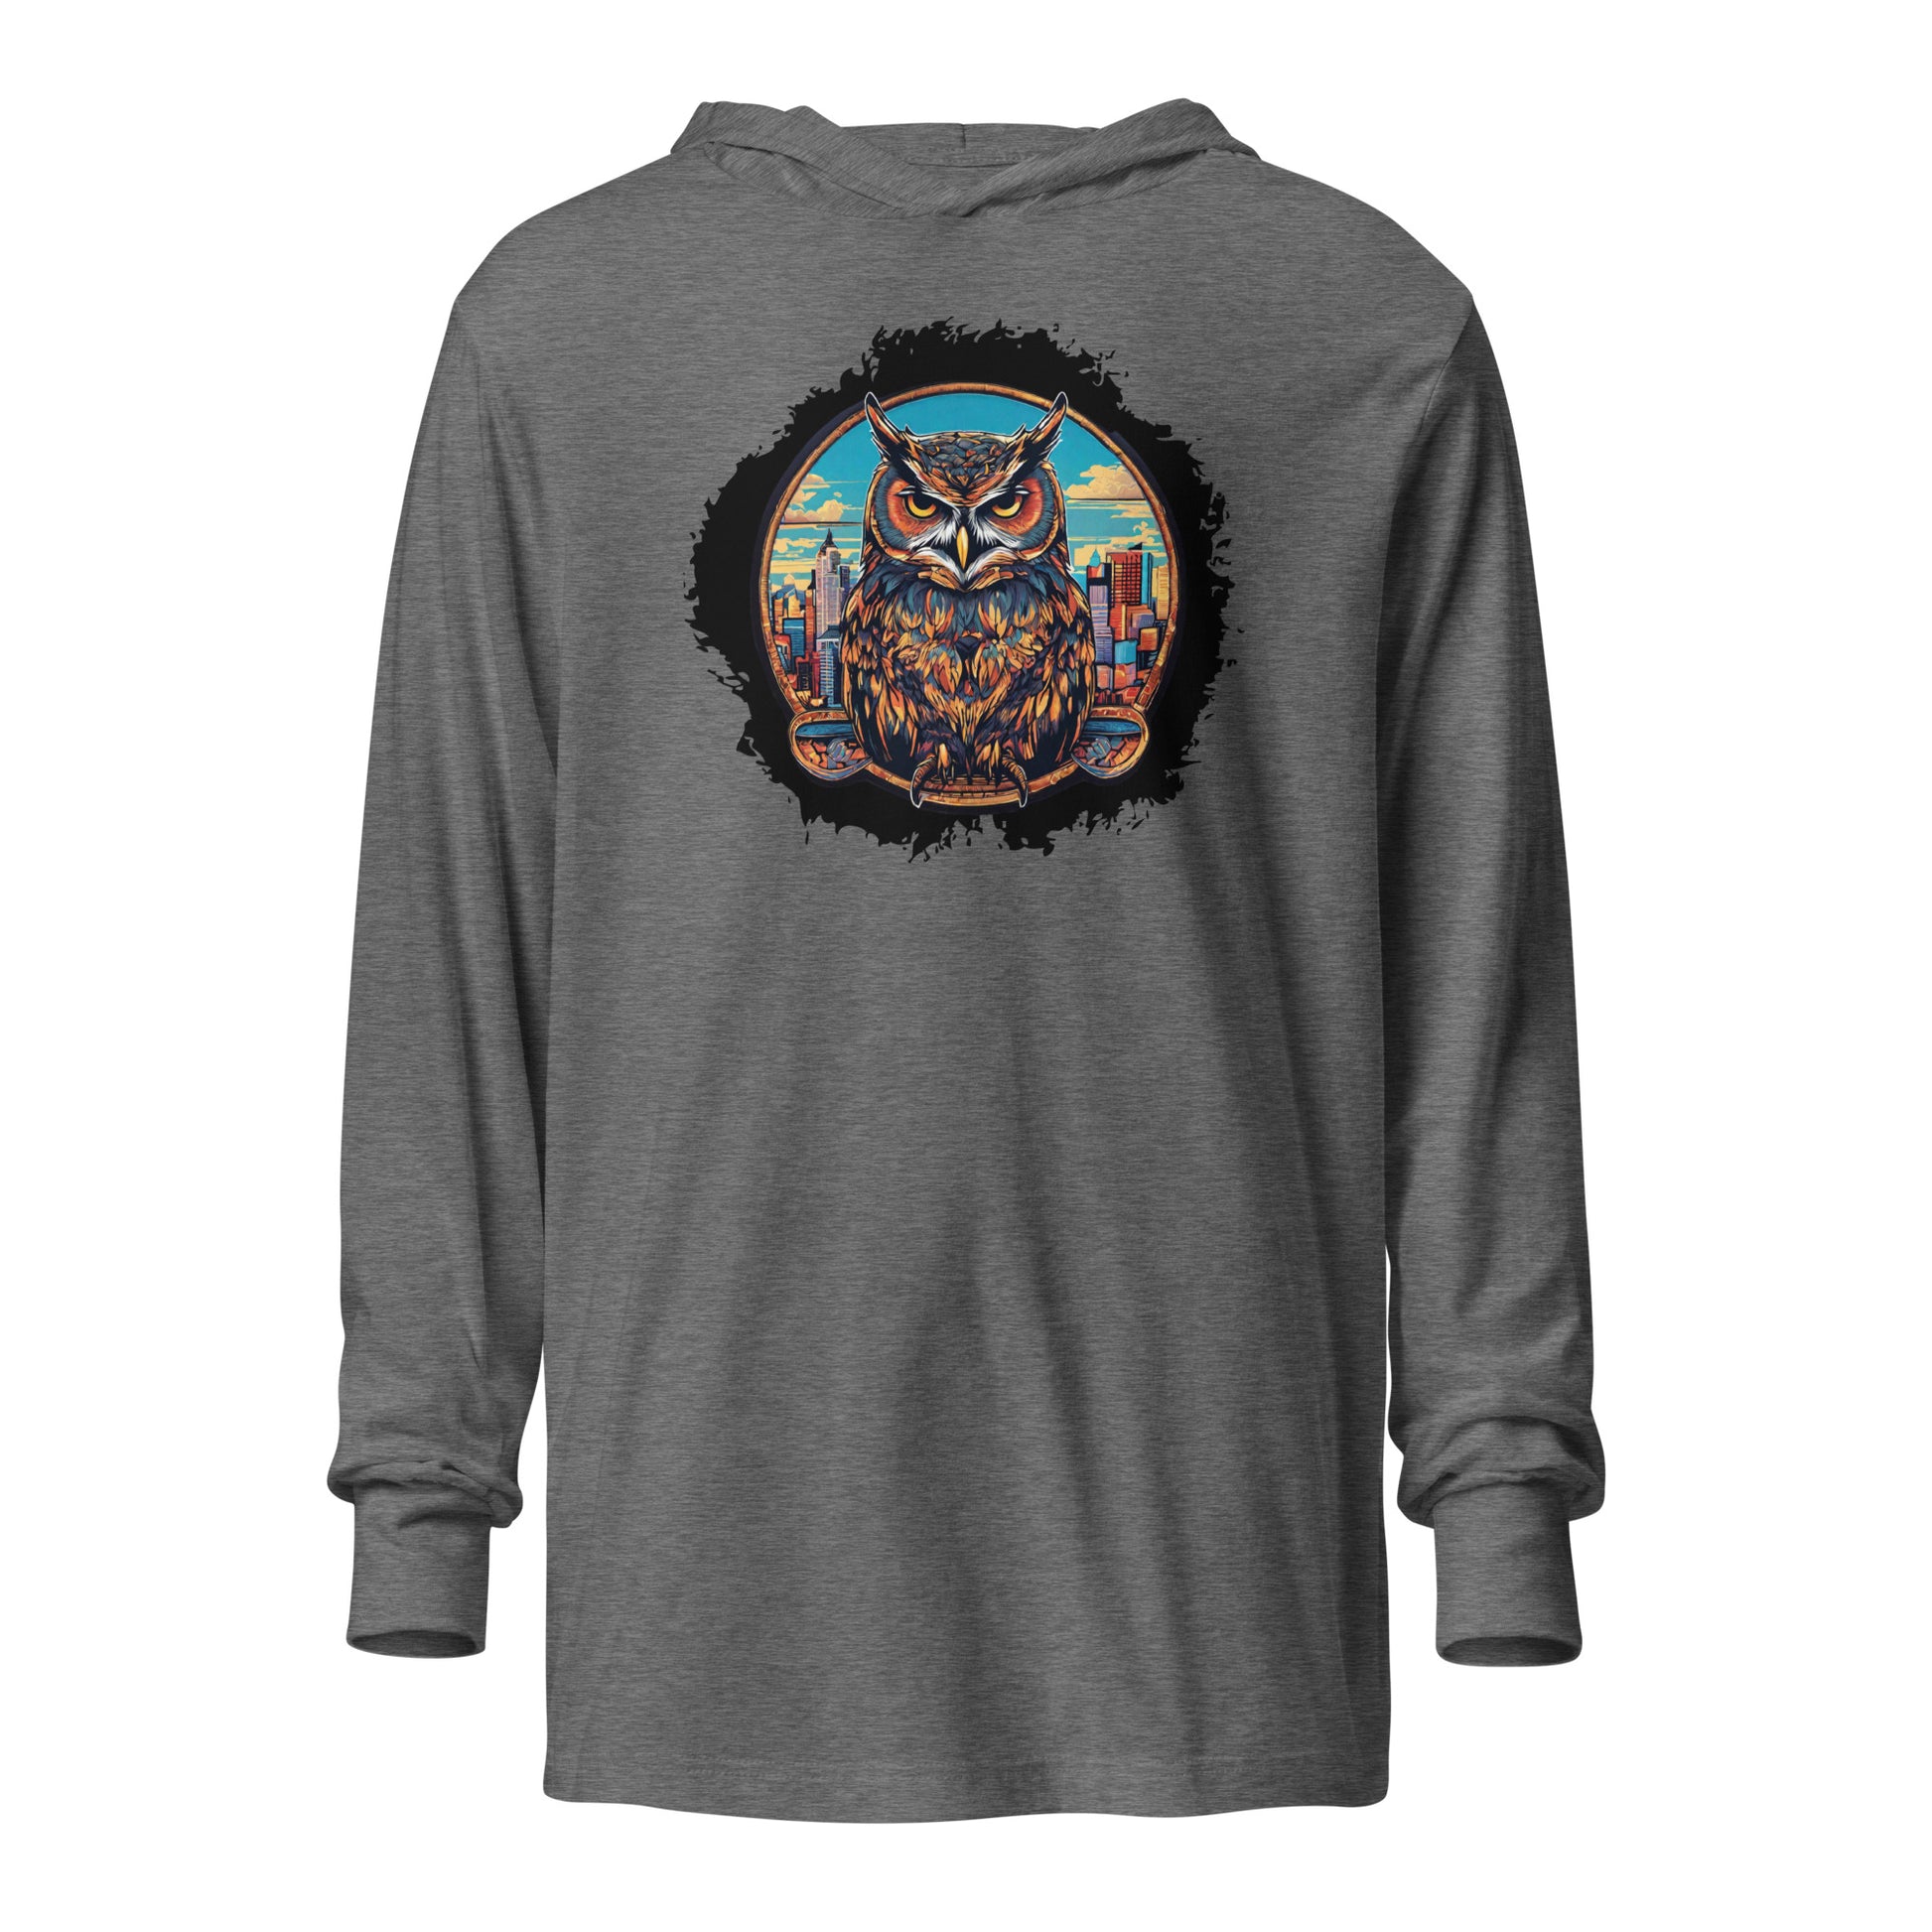 Owl in the City Emblem Hooded Long-Sleeve Tee Grey Triblend